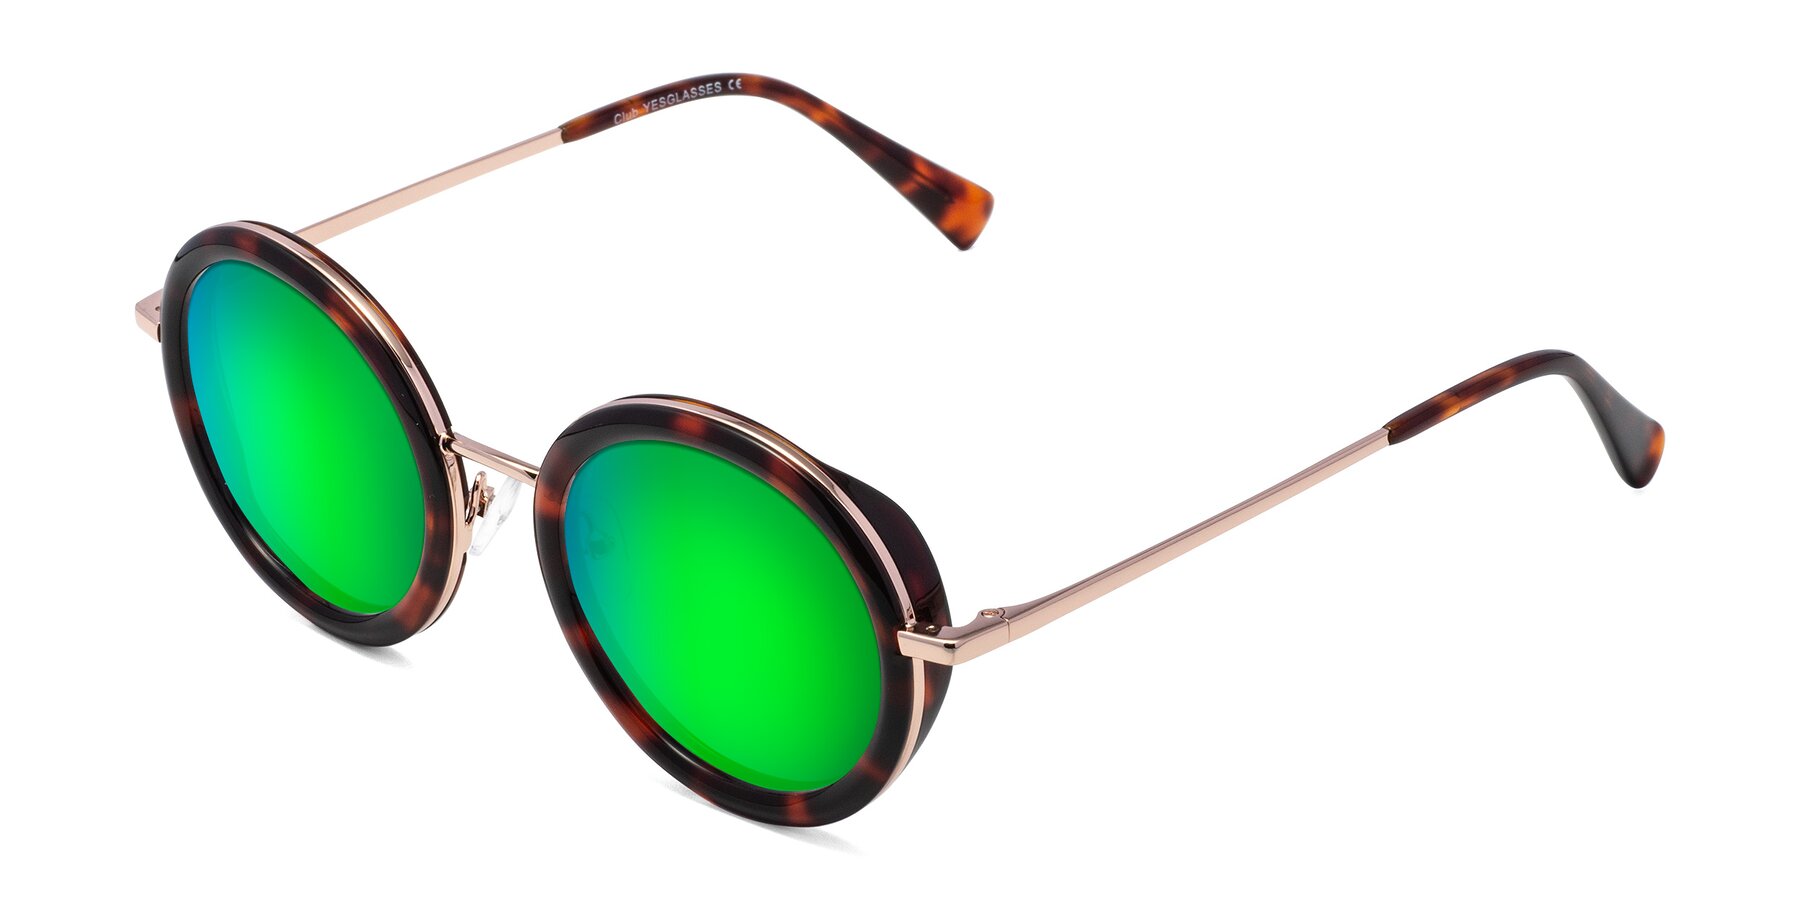 Angle of Club in Tortoise-Rose Gold with Green Mirrored Lenses